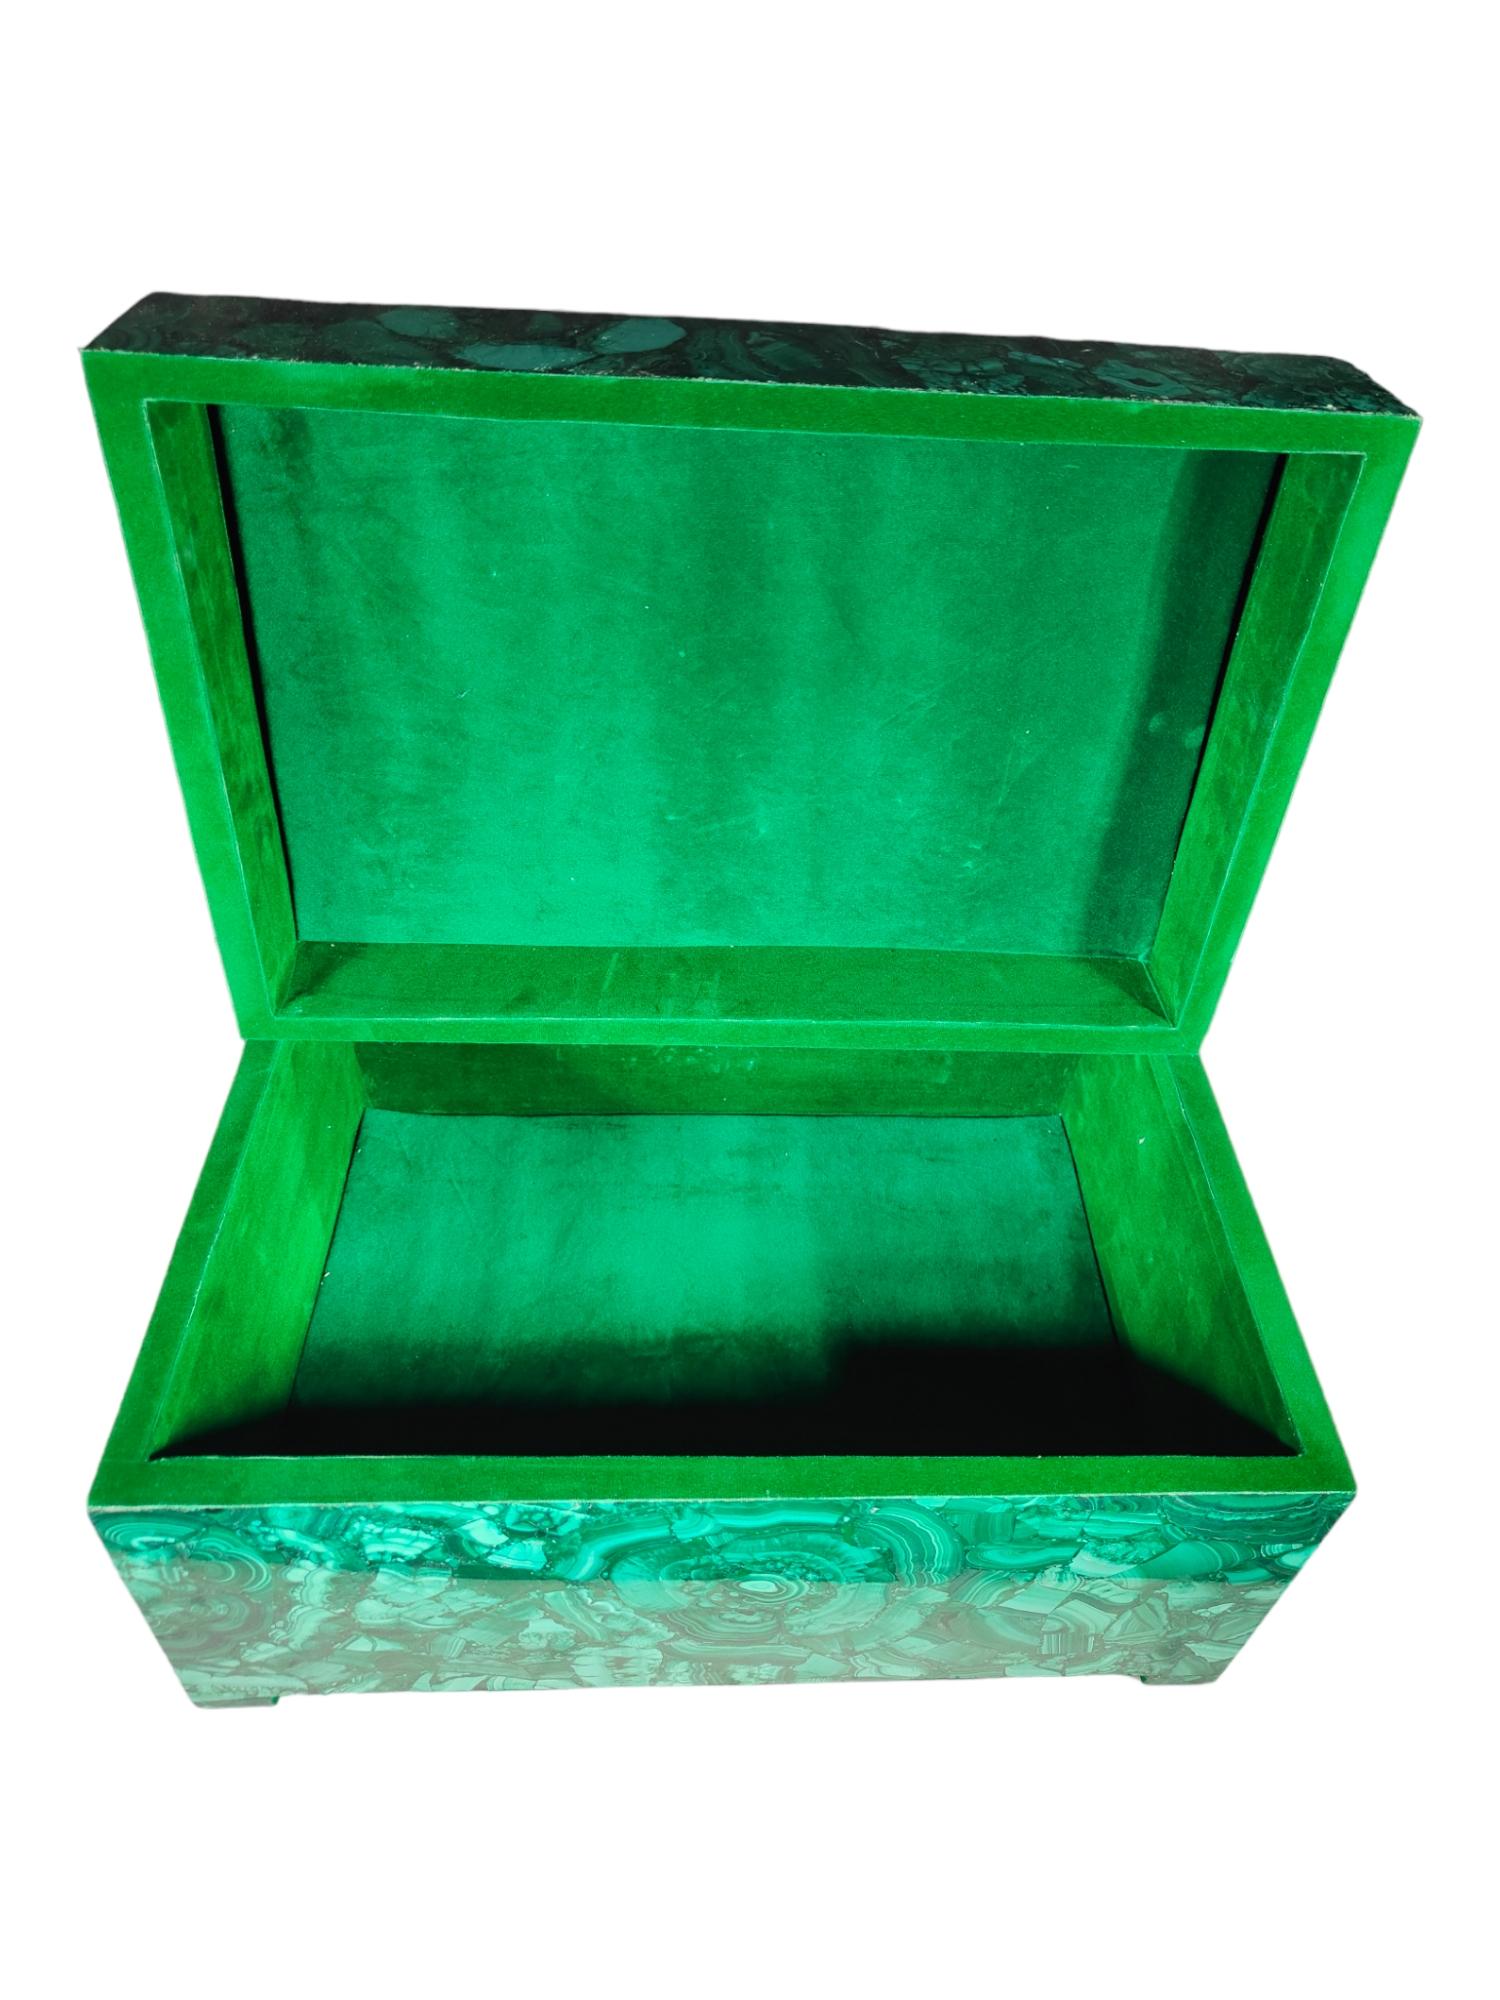 Large Malachite Box from the Mid-20th Century For Sale 9